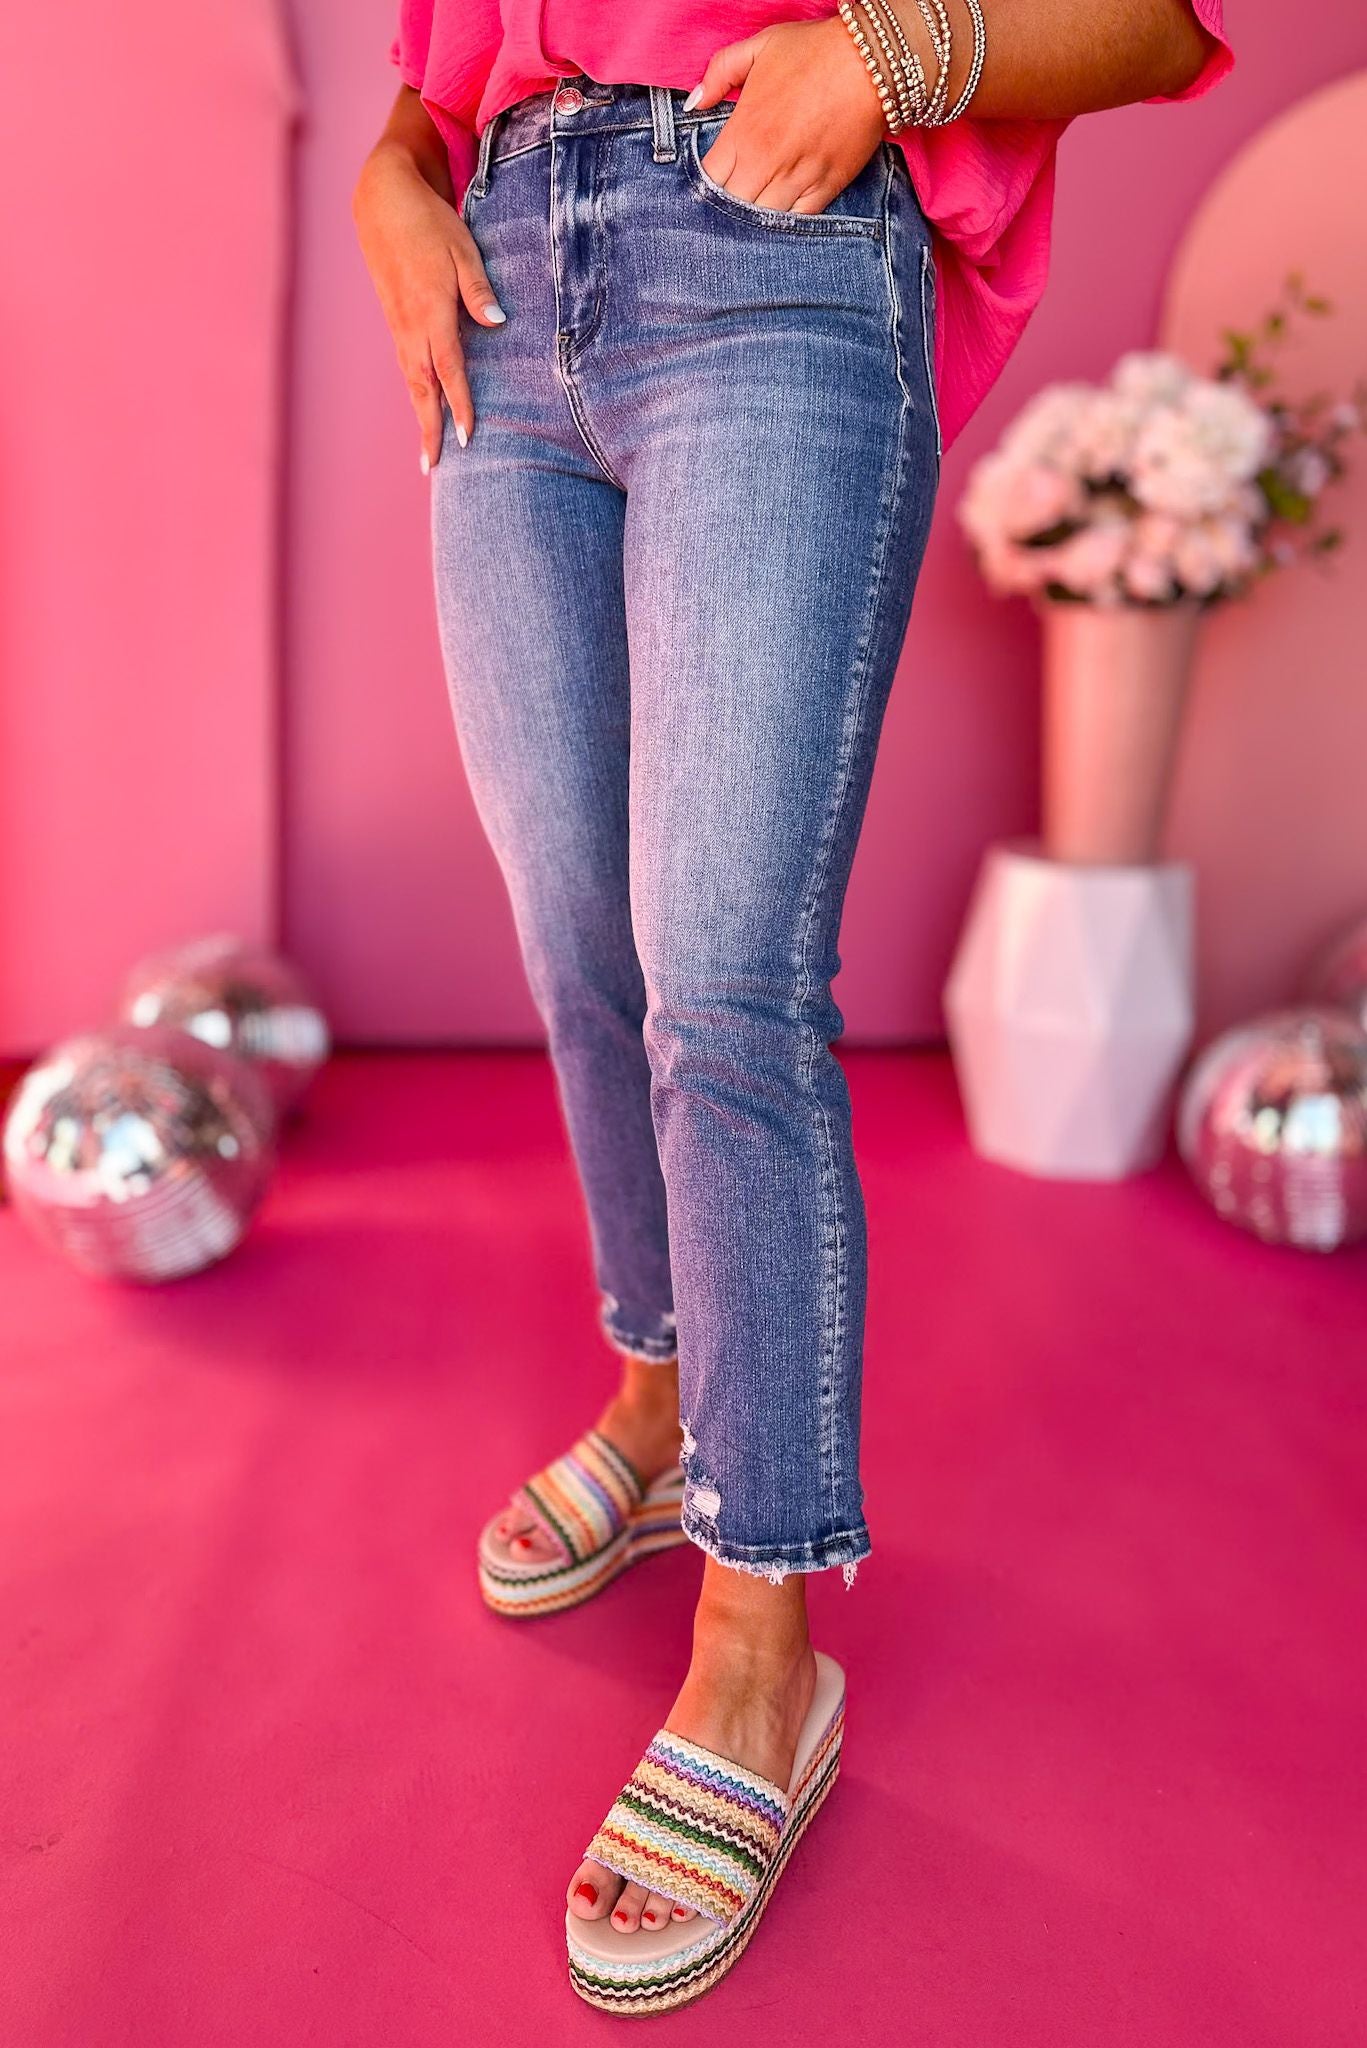 Lovervet By Vervet High Rise Slim Straight Jeans, straight jeans, blue jeans, must have jeans, must have style, must have comfortable style, spring fashion, spring style, street style, mom style, elevated comfortable, elevated style, shop style your senses by mallory fitzsimmons